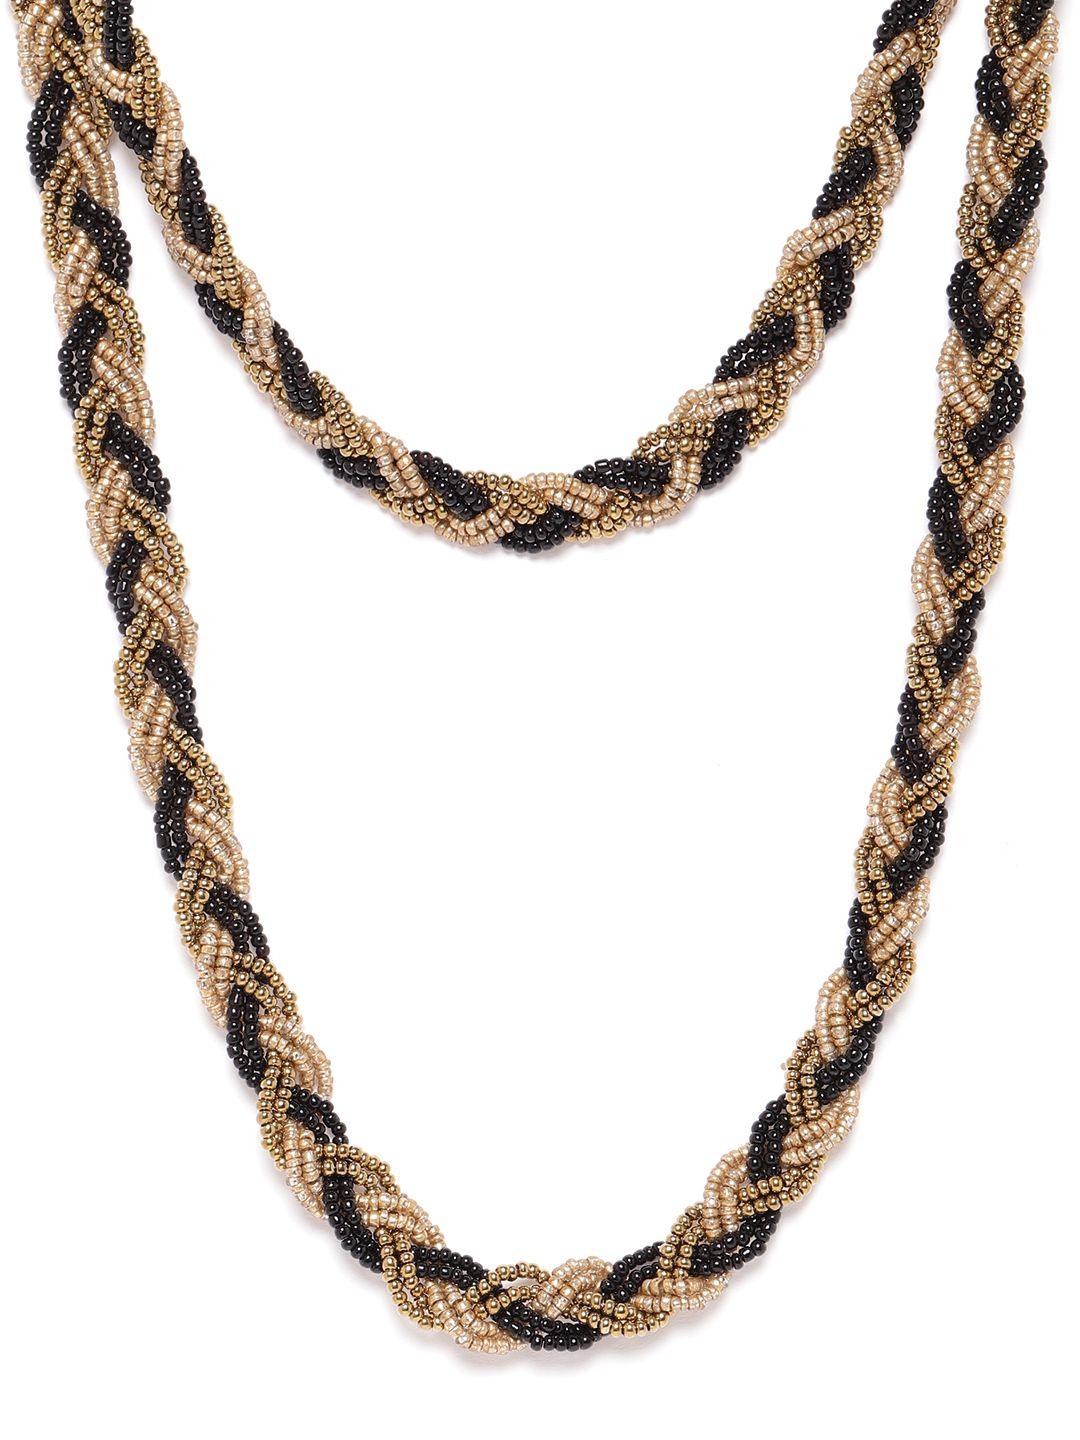 richeera women black gold-plated beaded braided layered necklace